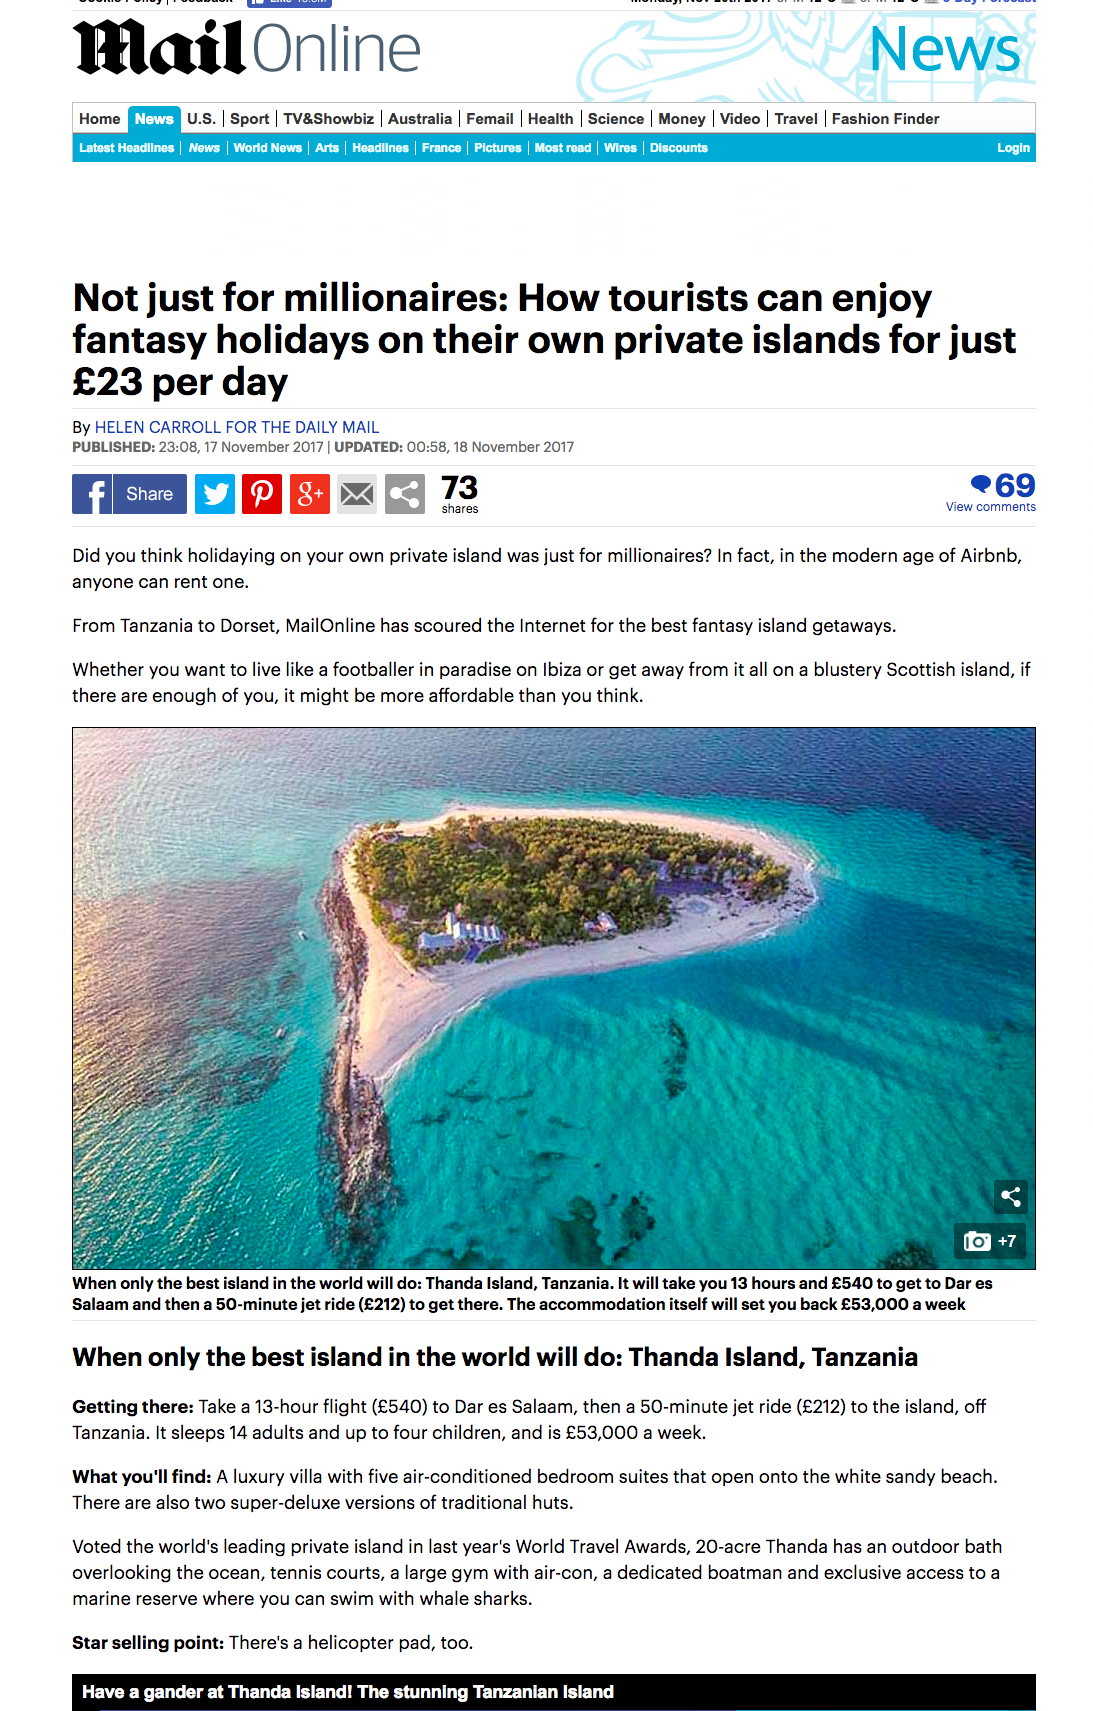 Not just for millionaires: How tourists can enjoy fantasy holidays on their own private islands for just £23 per day